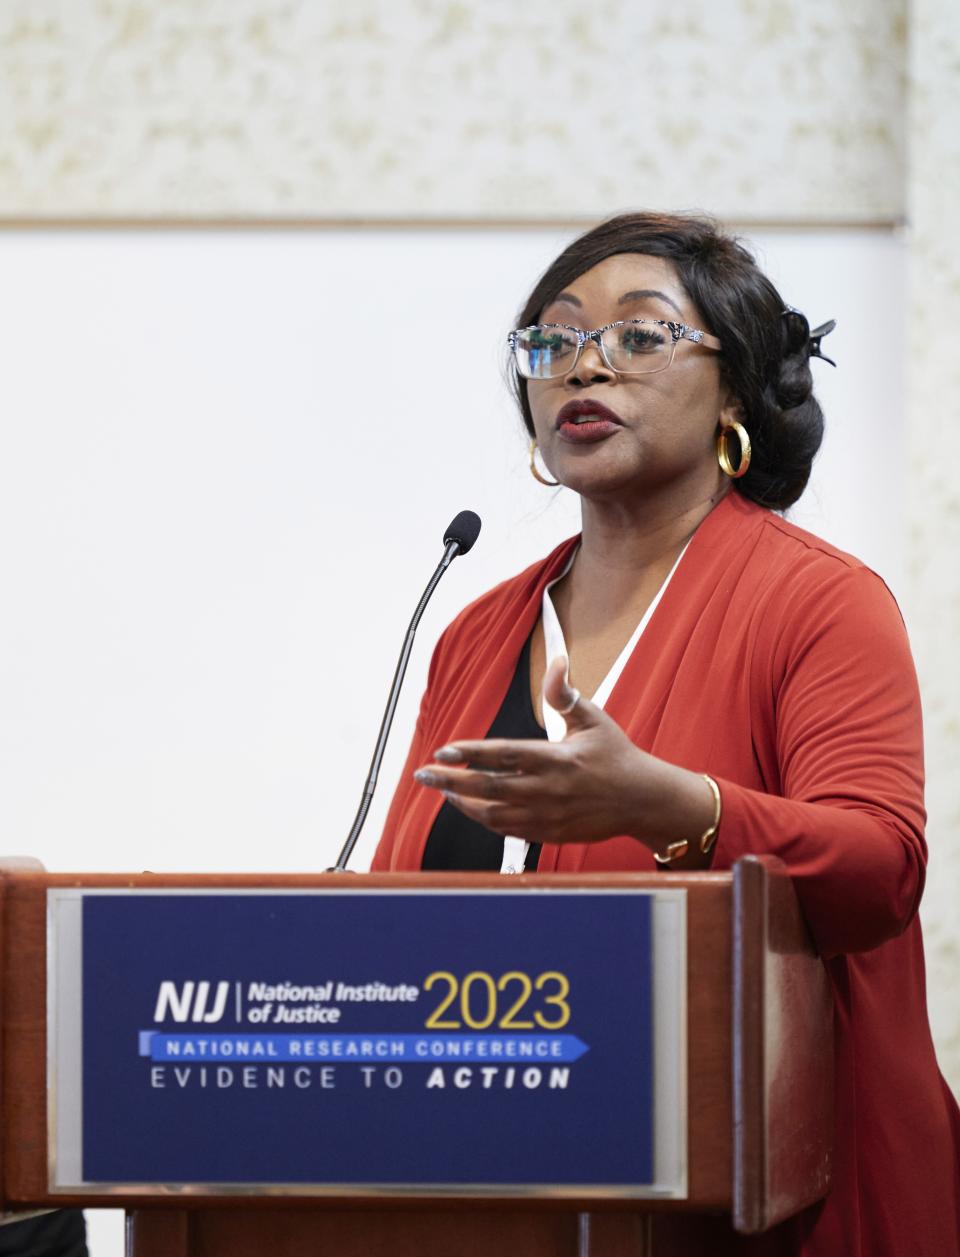 Rabi Musah presents as part of the NIJ 2023 Research Conference panel "The Problem with Cannabis: Hemp, Marijuana, Legalization, and the Farm Bill of 2018"